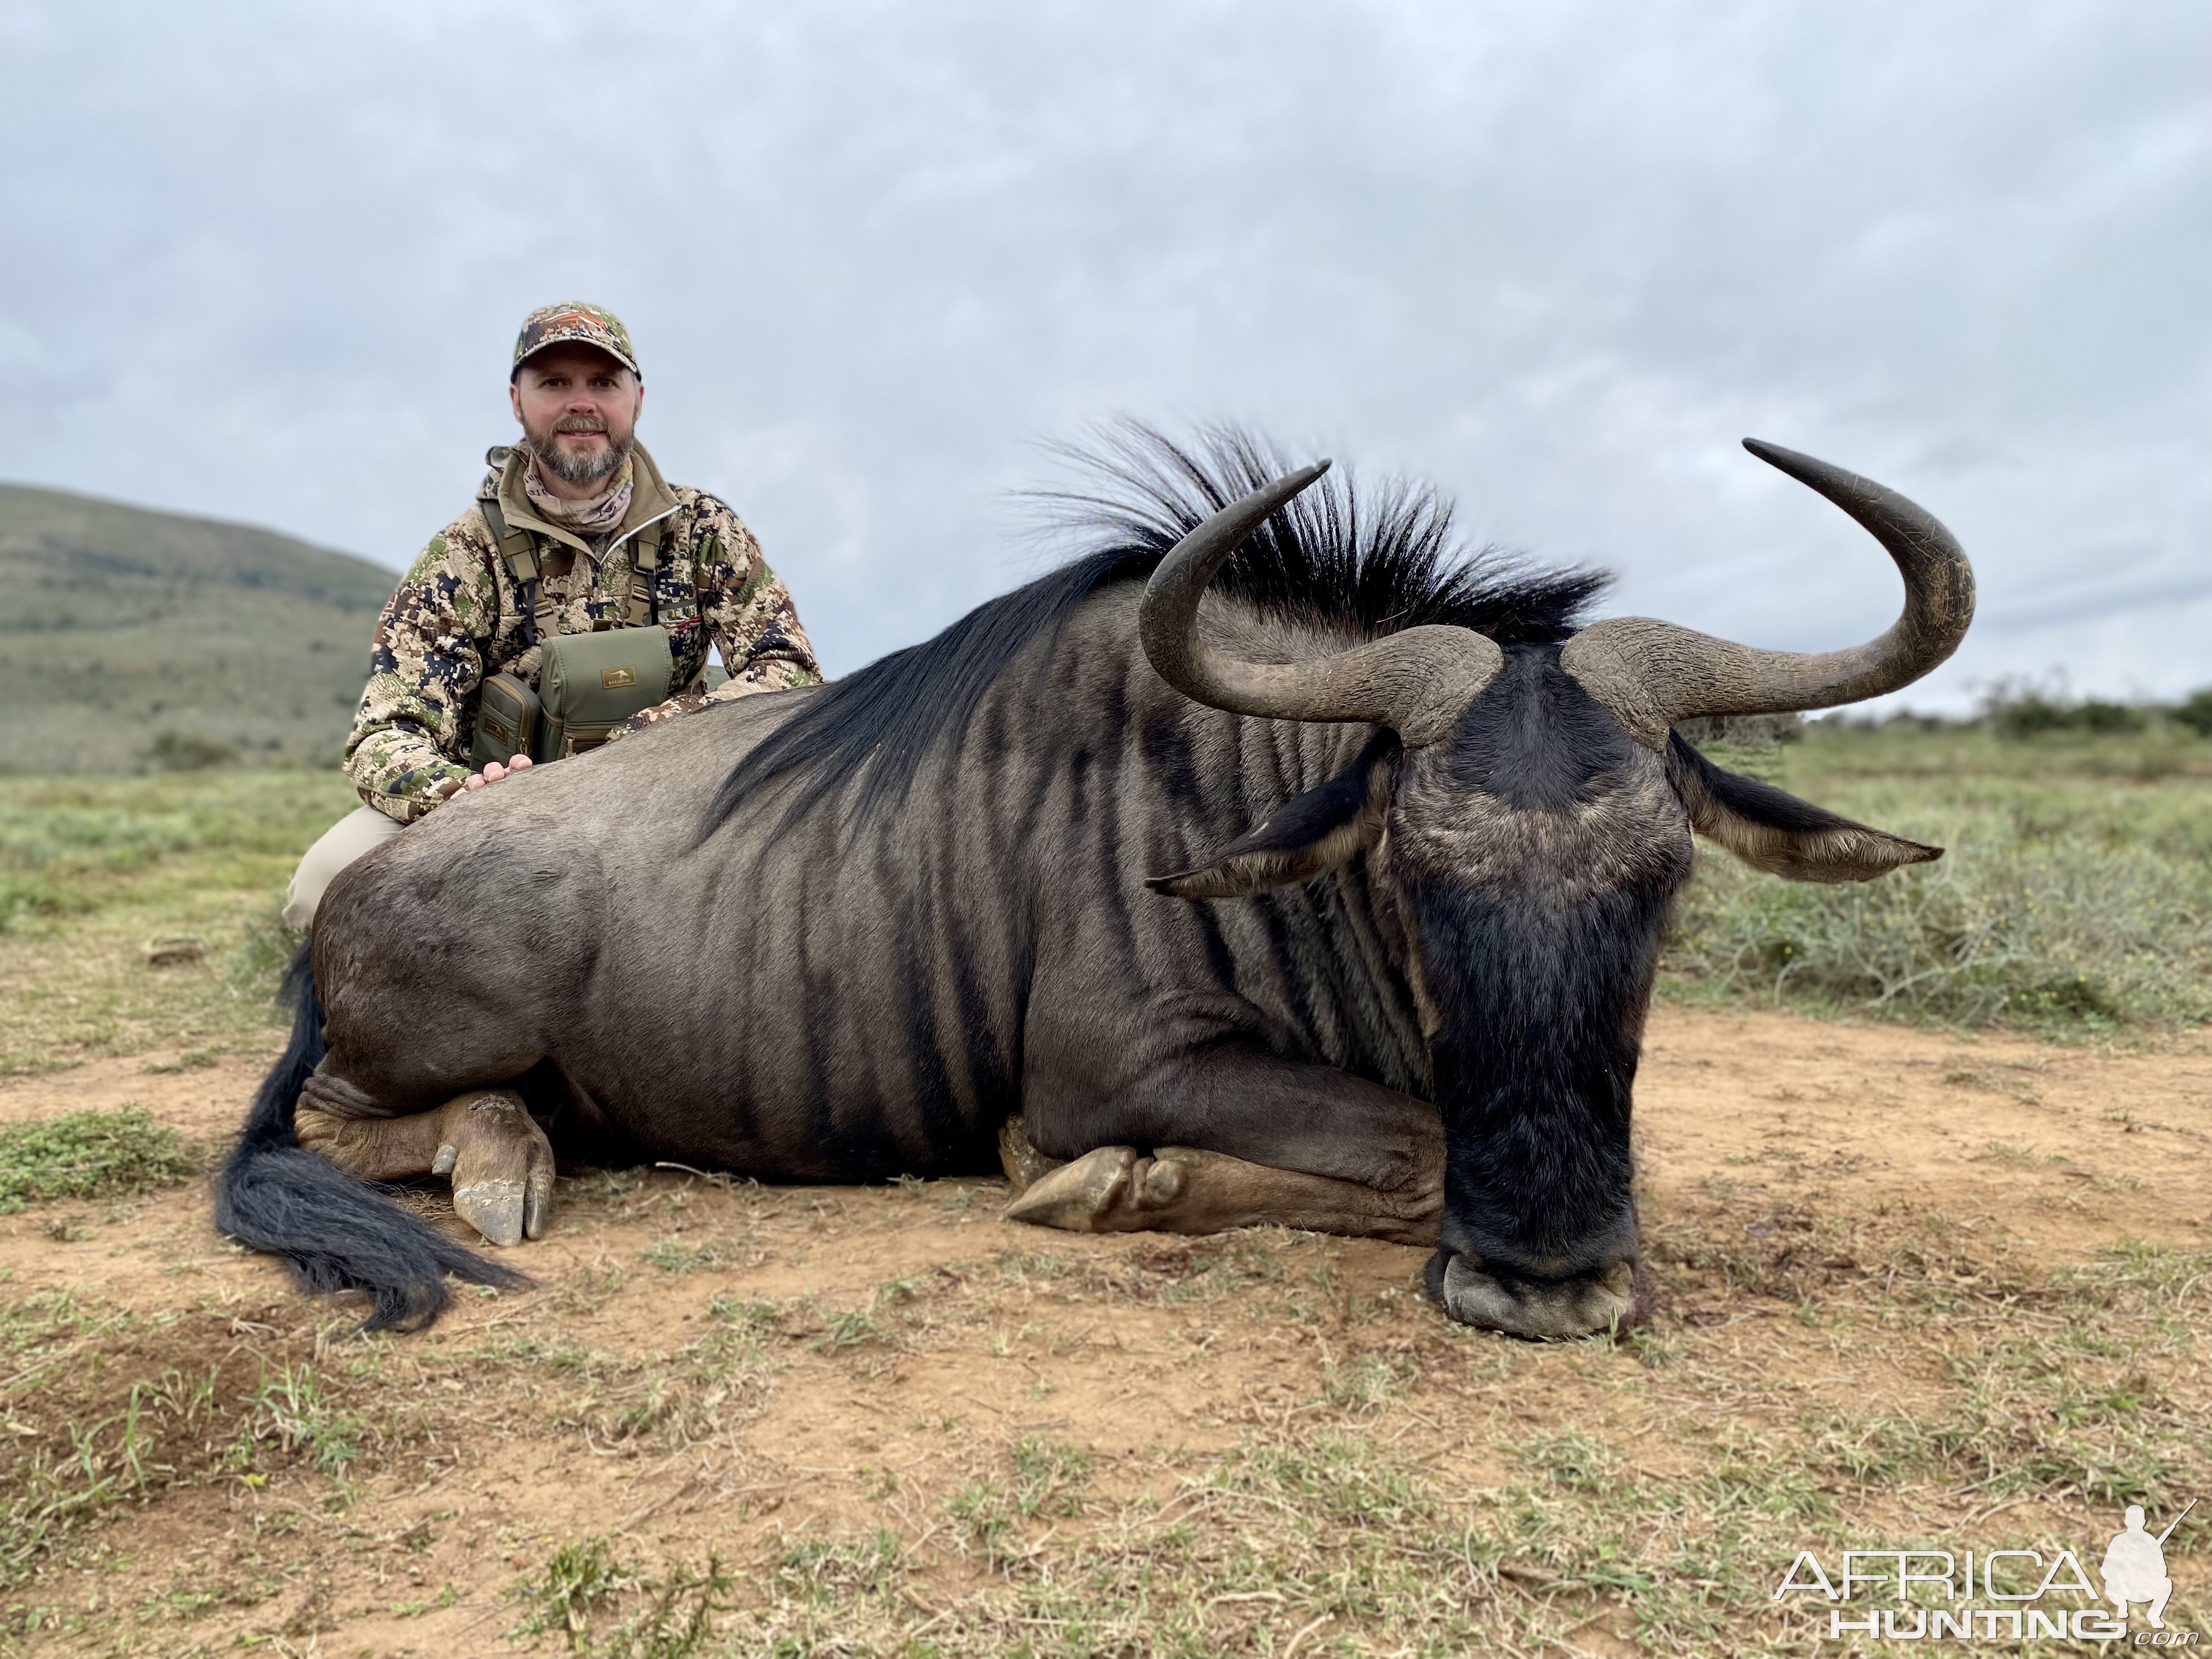 Blue Wildebeest Hunting Eastern Cape South Africa